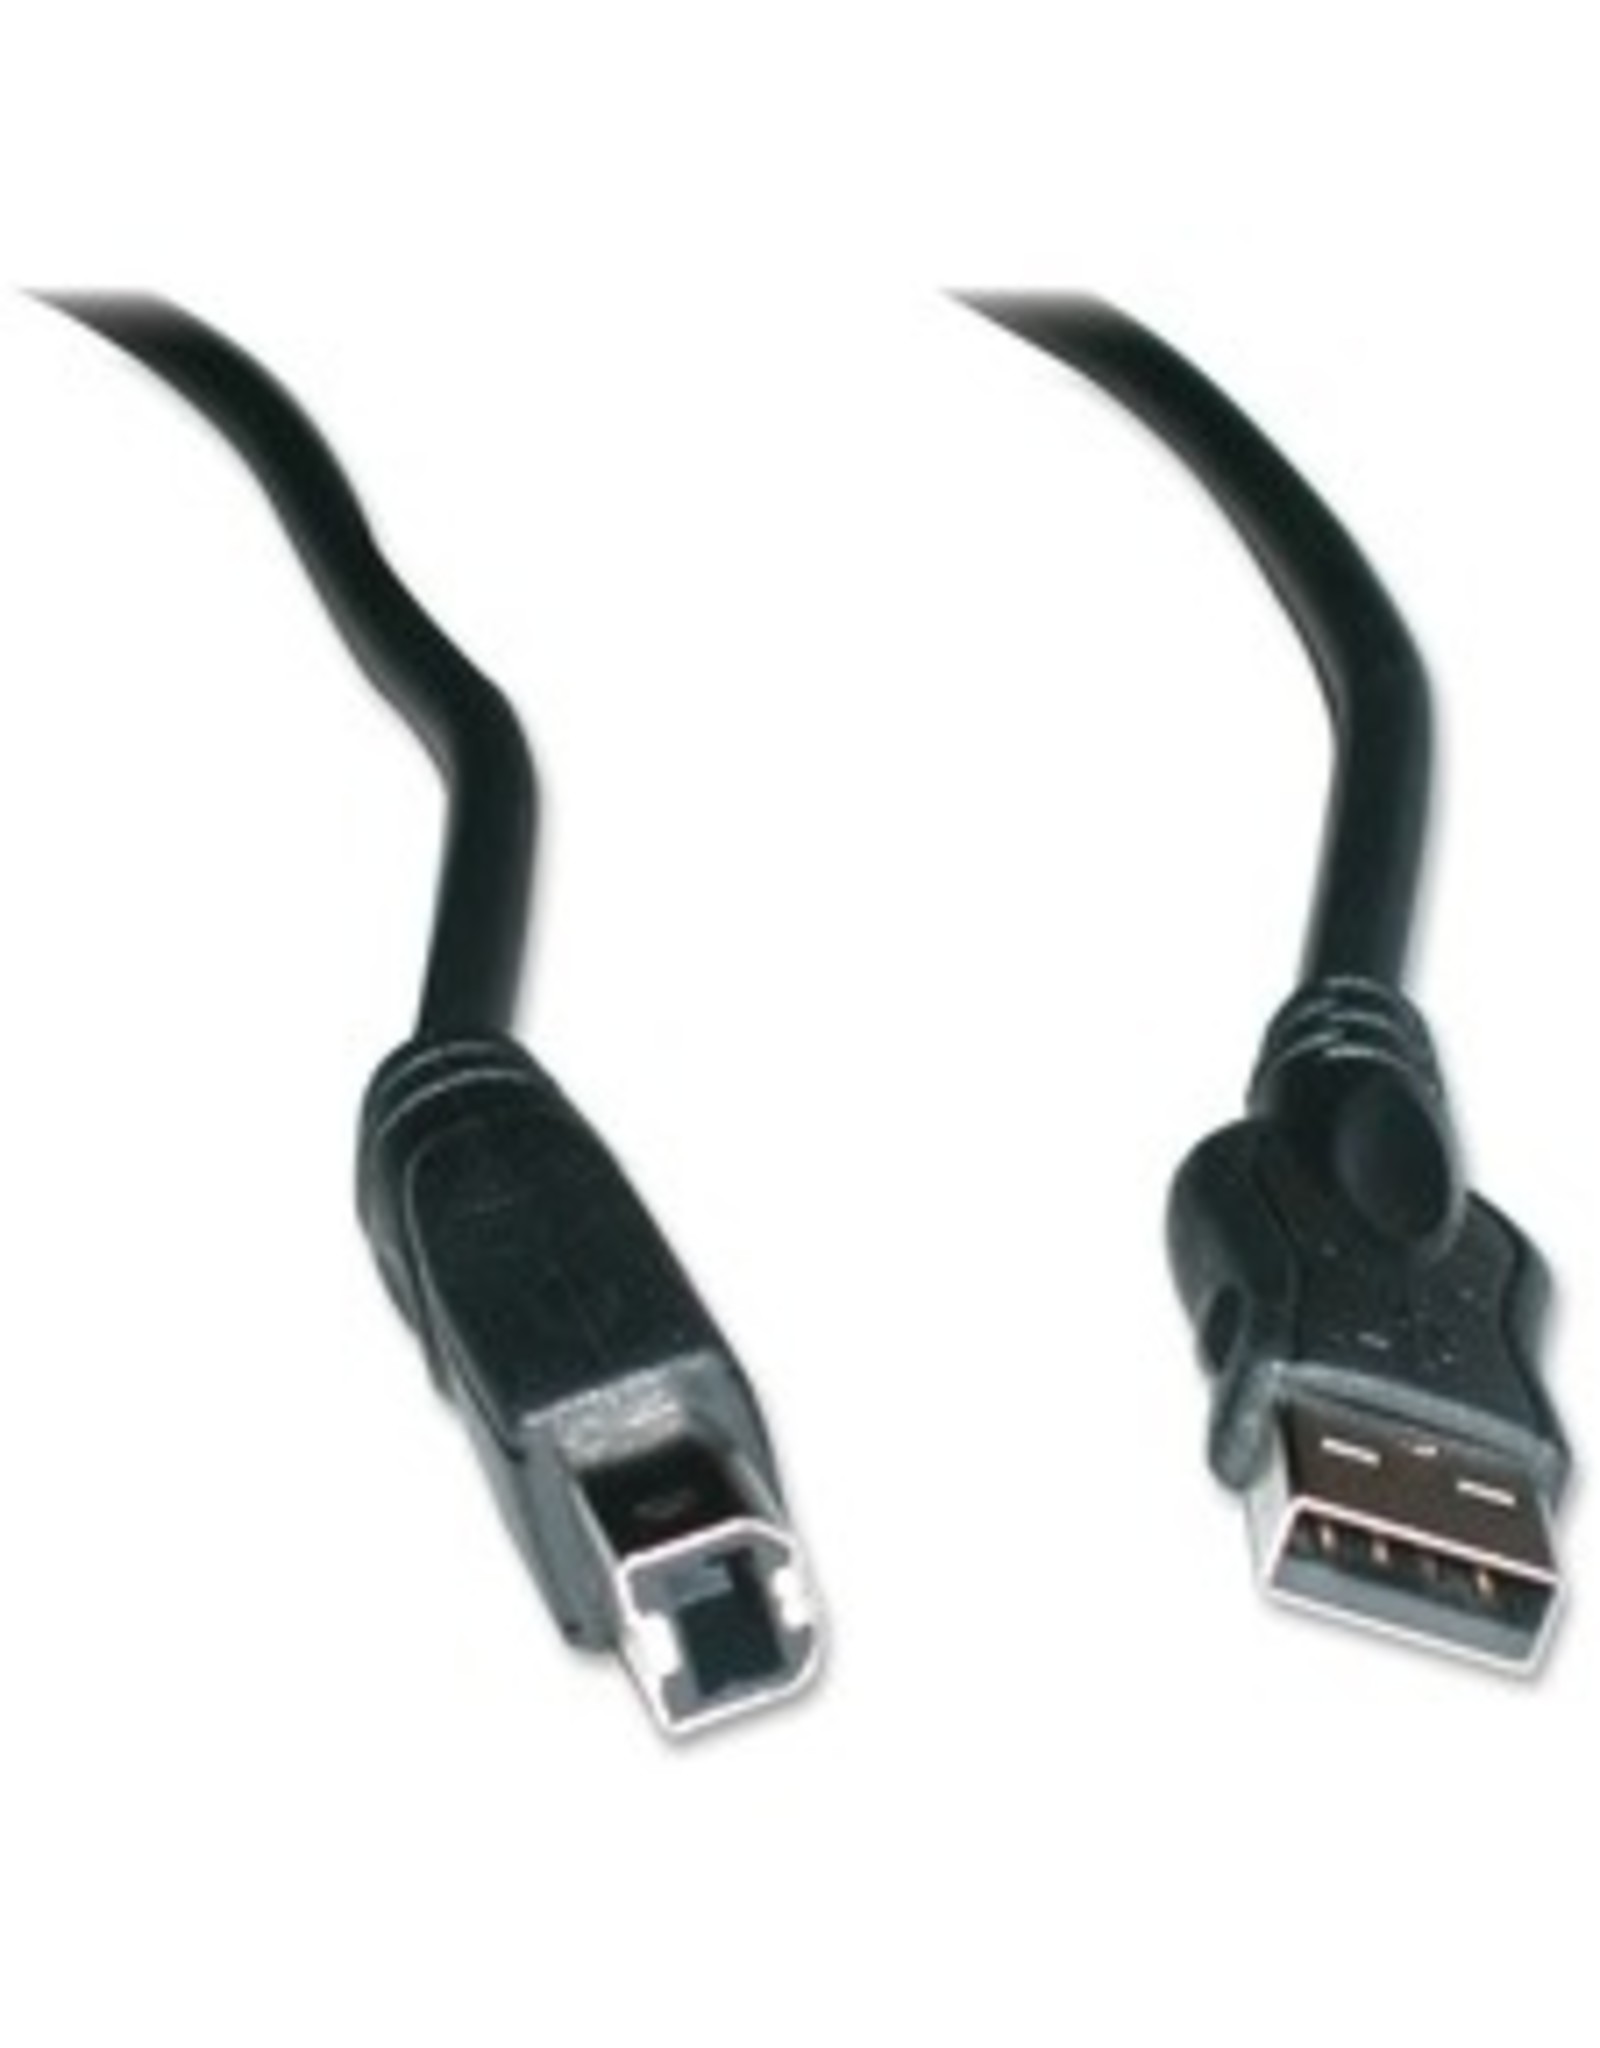 CABLE*USB AM/BM2.0 SPEED 10'